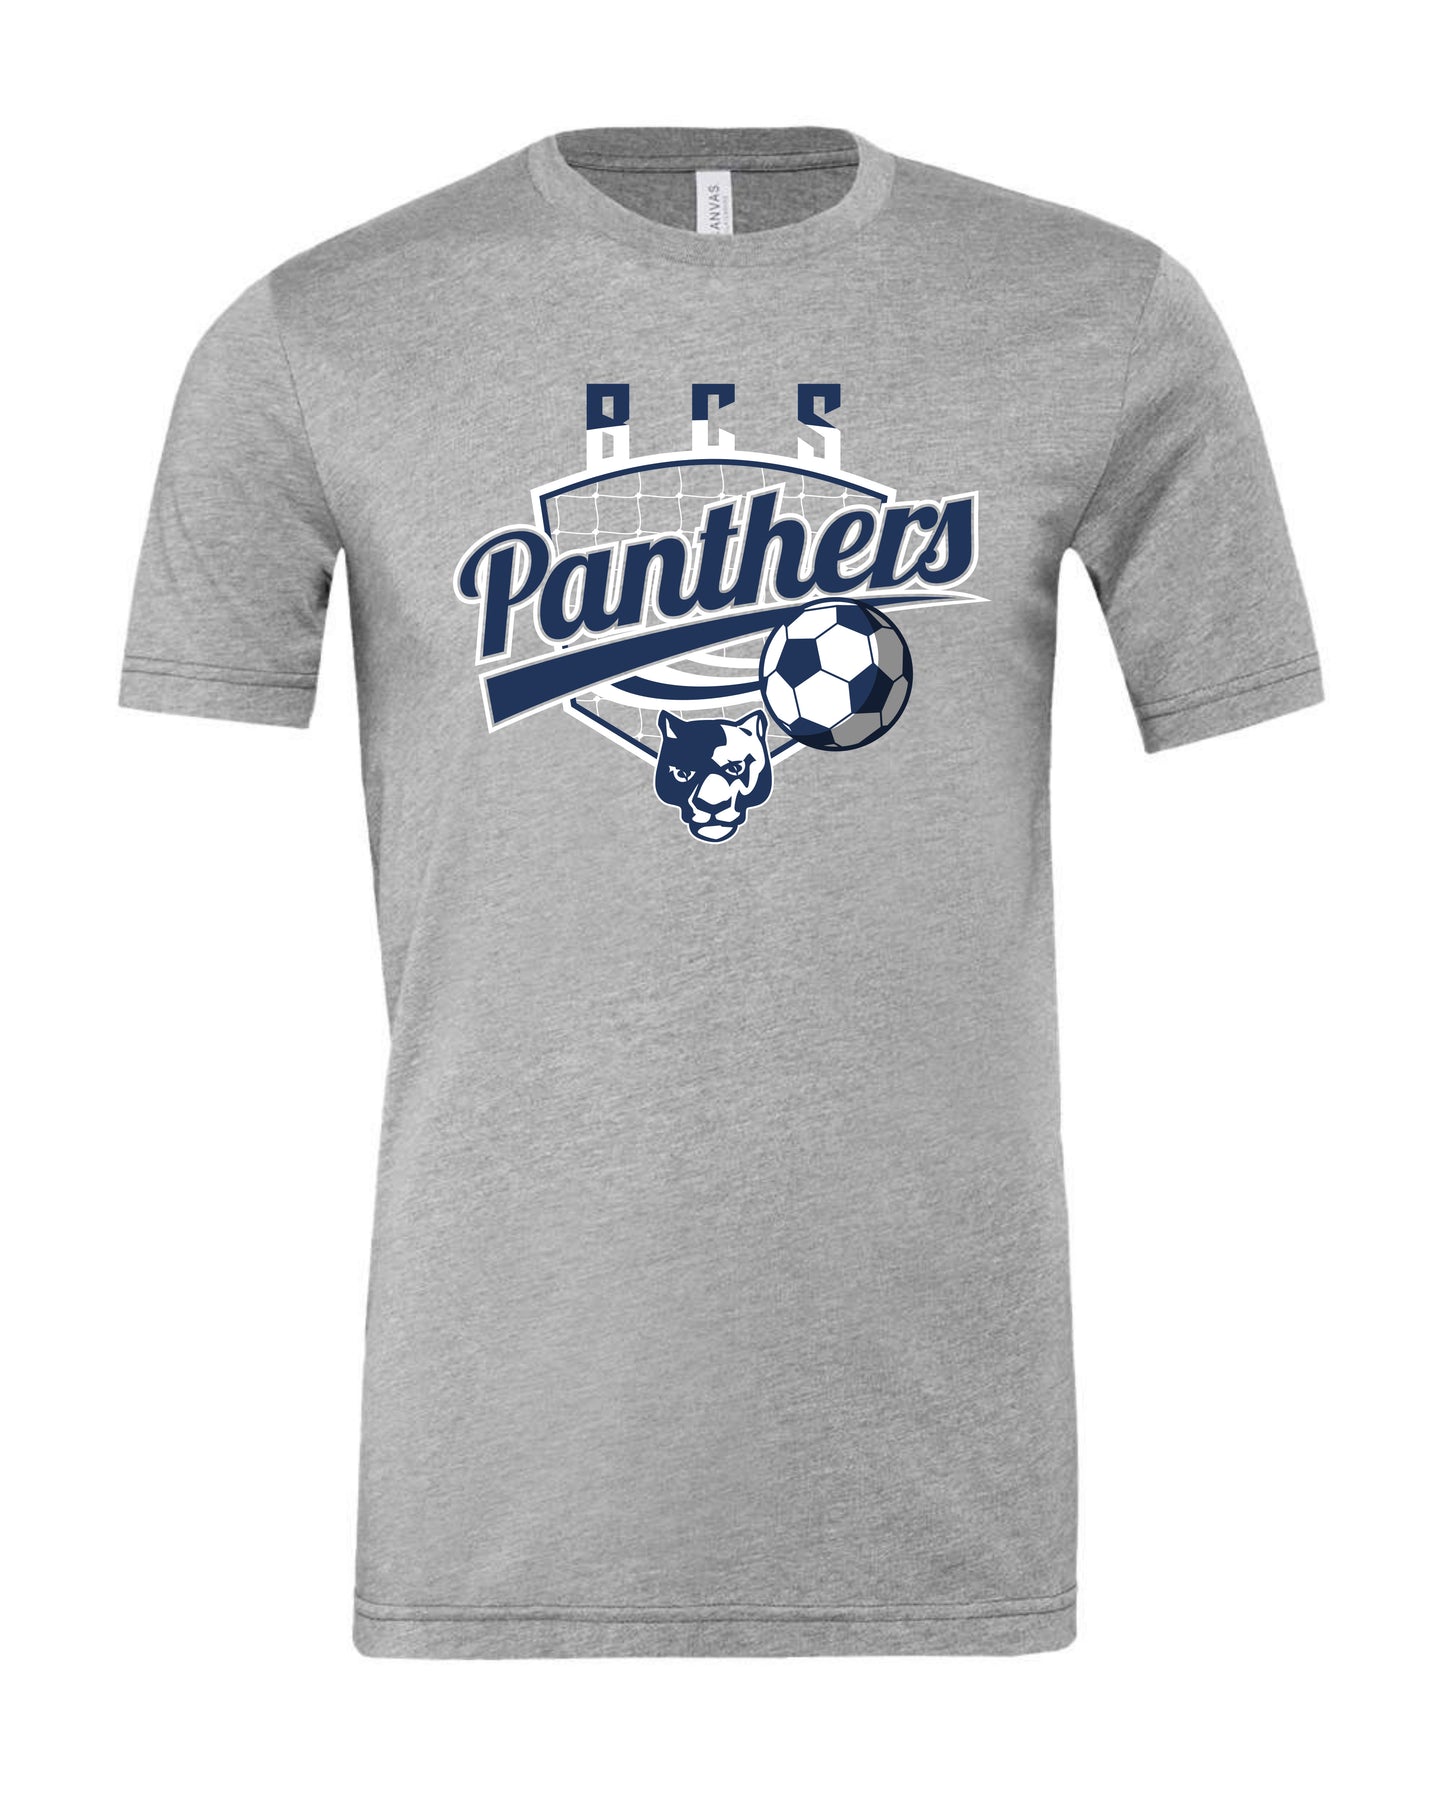 BCS Panthers Soccer Shield - Adult Tee